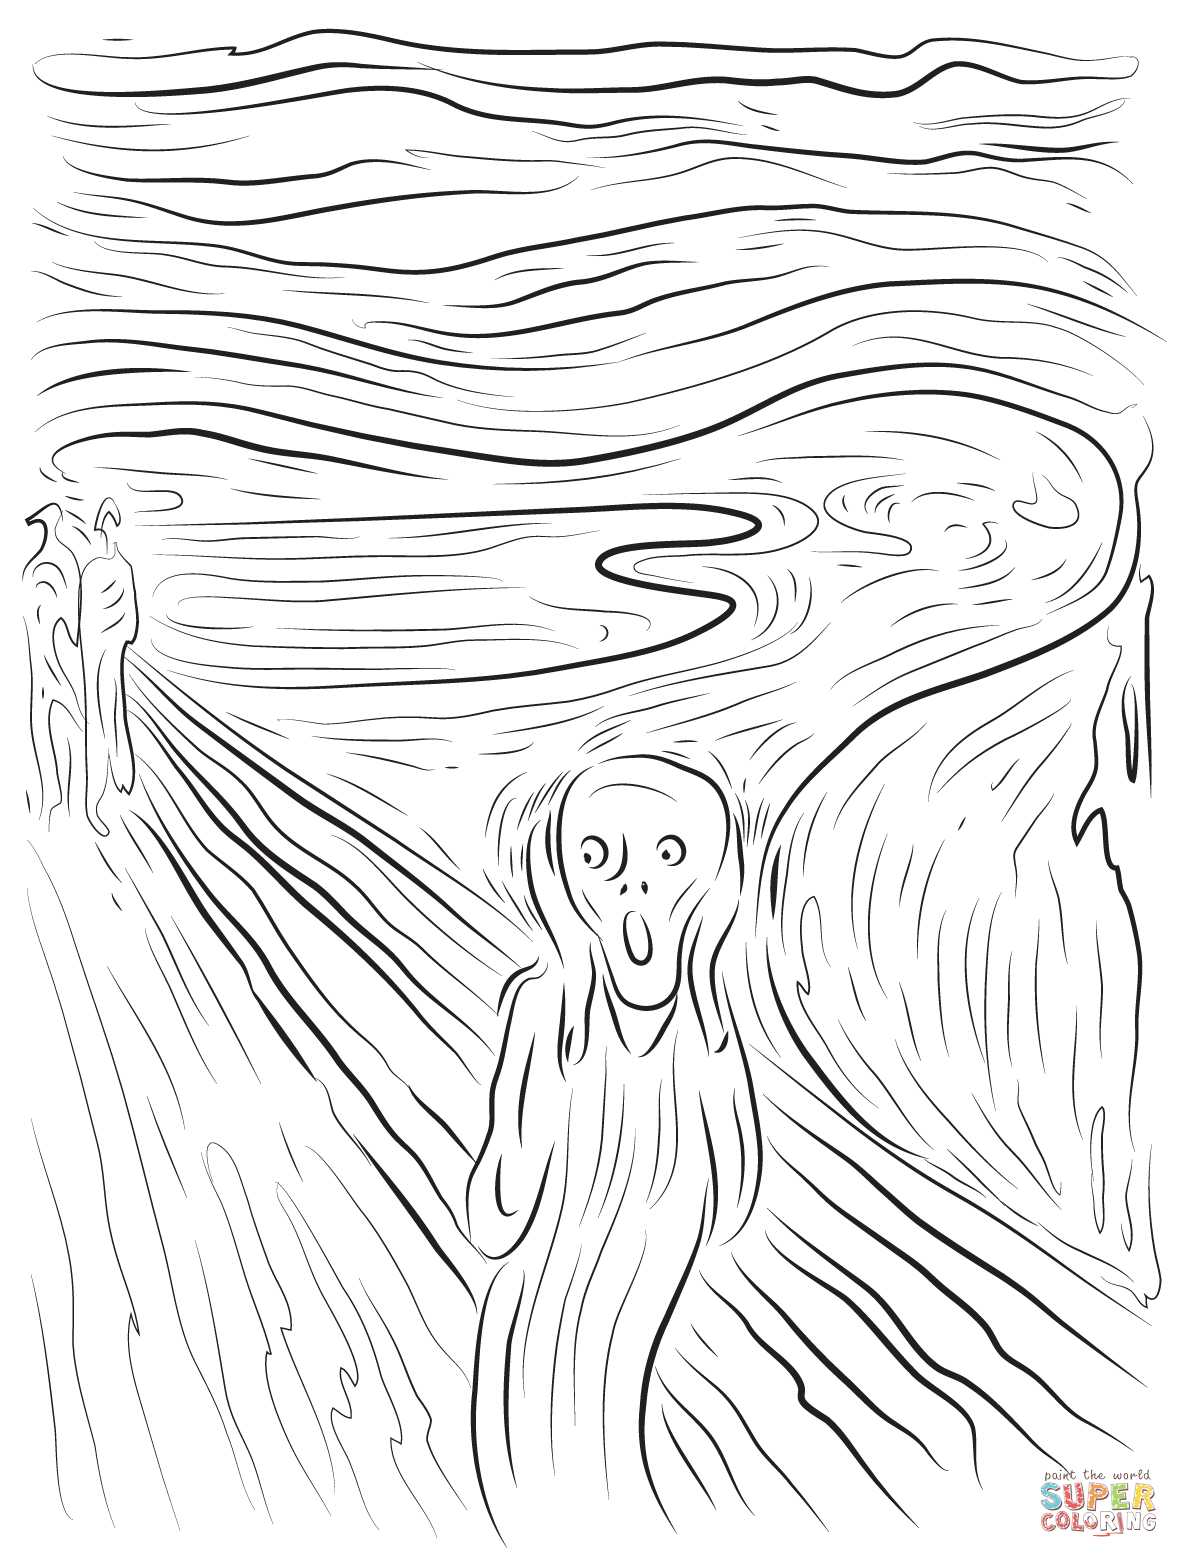 The scream by edvard munch coloring page free printable coloring pages